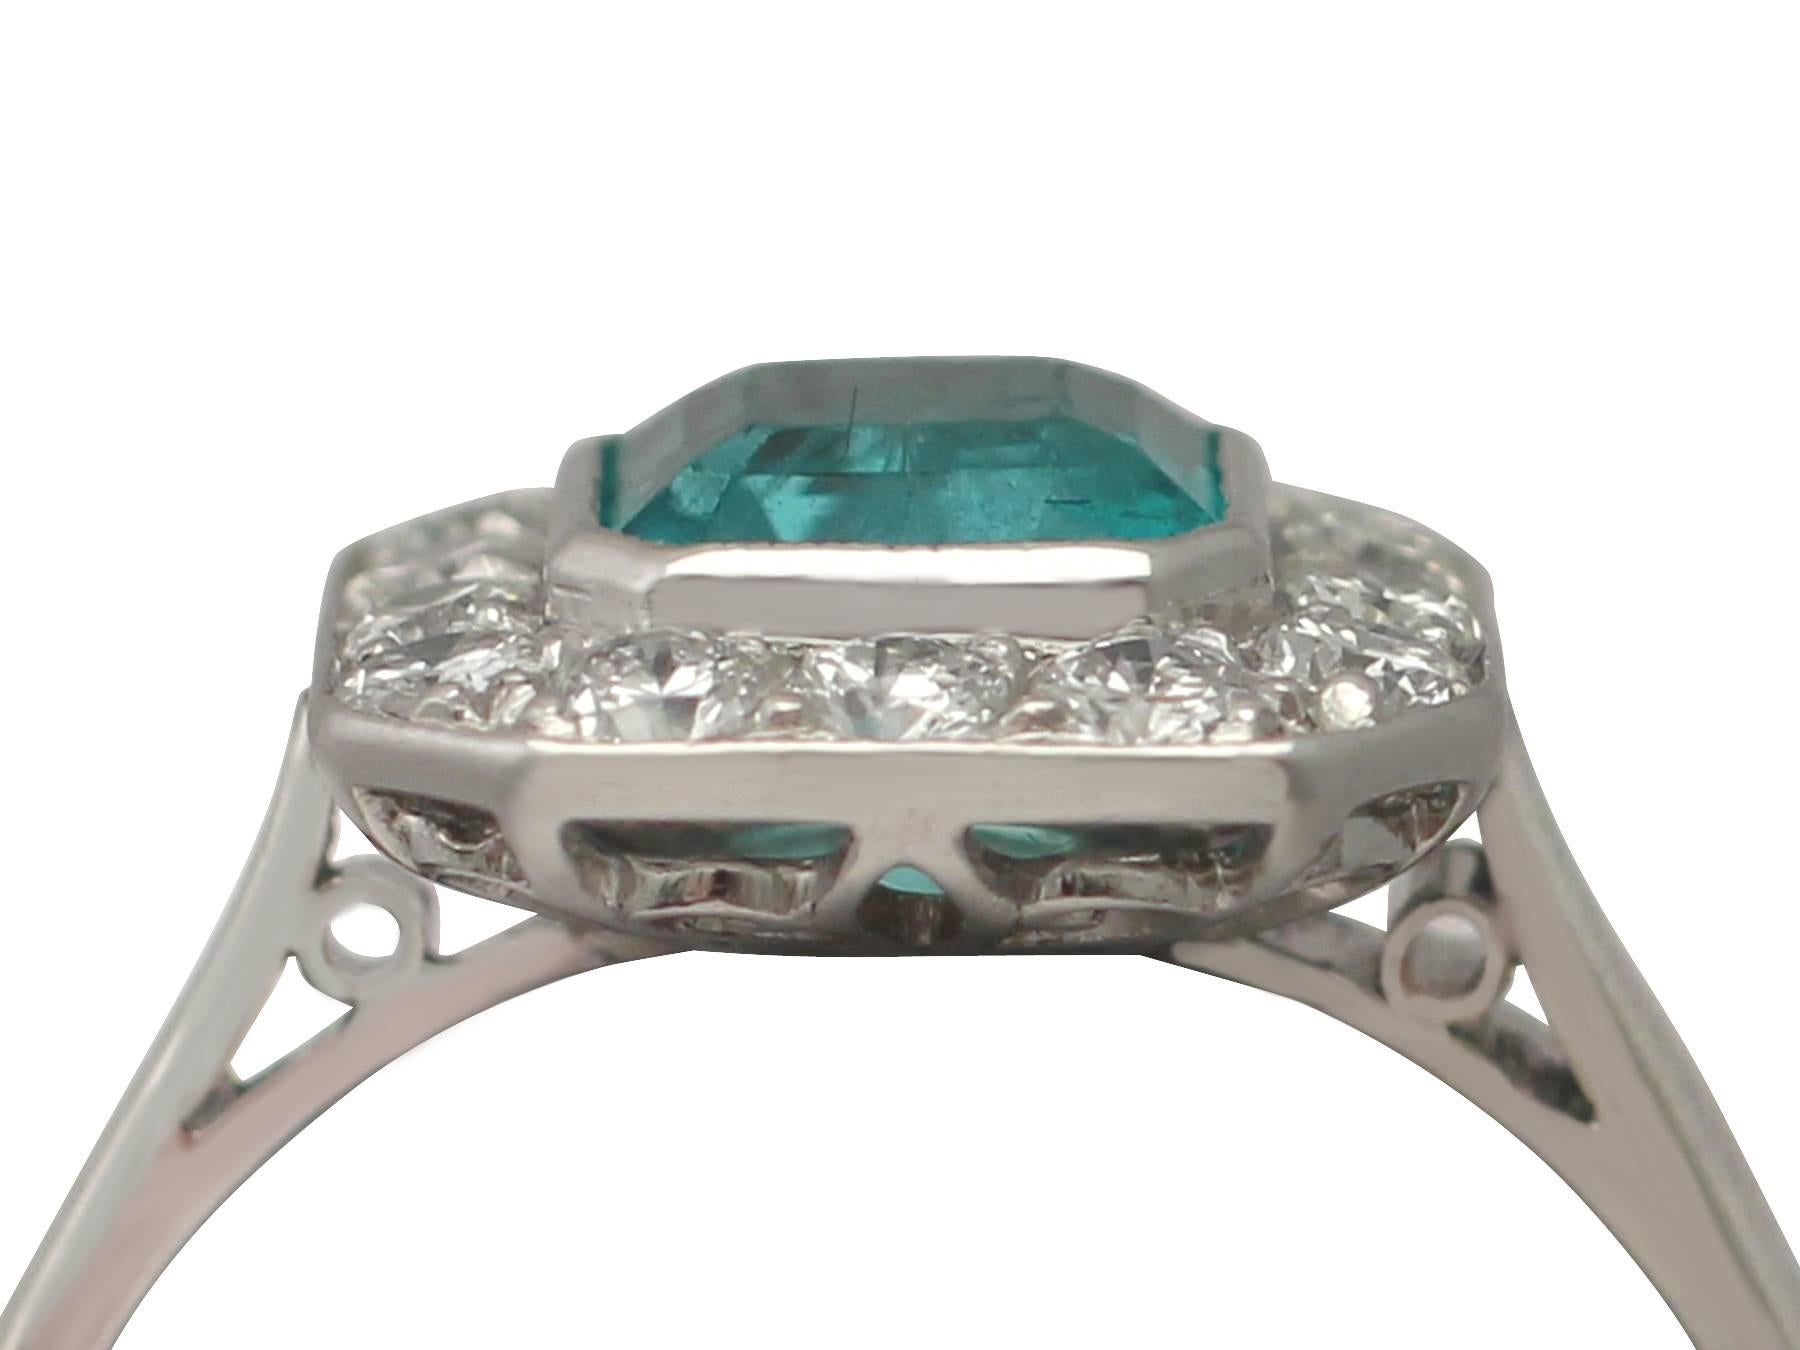 A fine and impressive vintage 0.90 carat emerald and 0.42 carat diamond, platinum cluster / dress ring; part of our diverse vintage jewellery and estate jewelry collections

This fine and impressive vintage emerald cluster ring has been crafted in